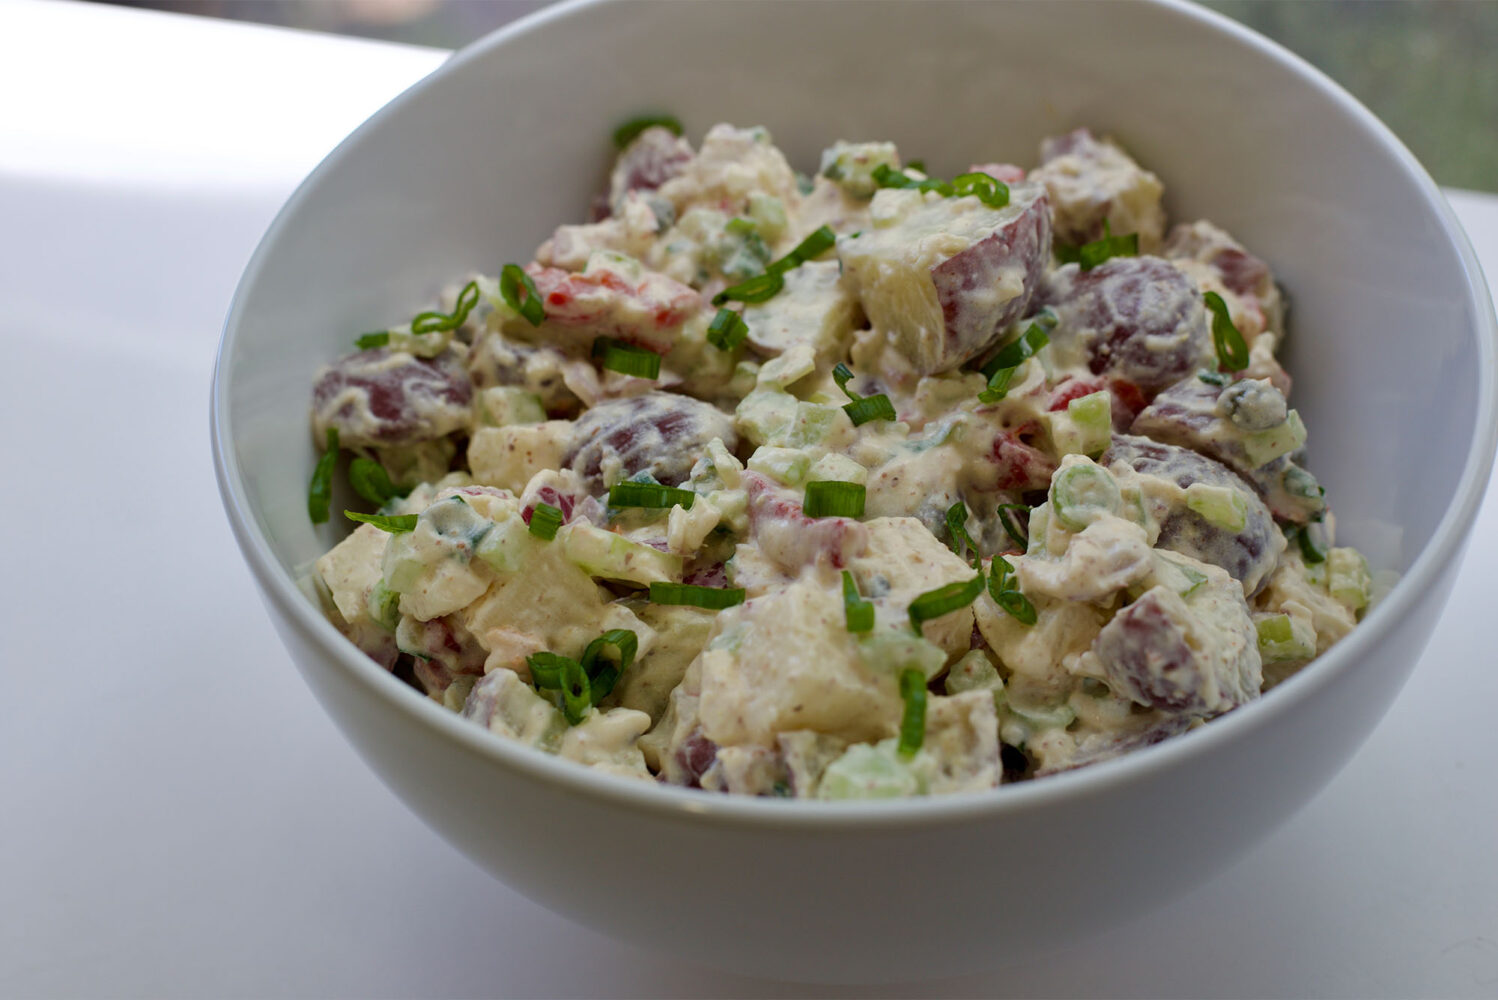 Photo: a large white bowl filled with potato salad